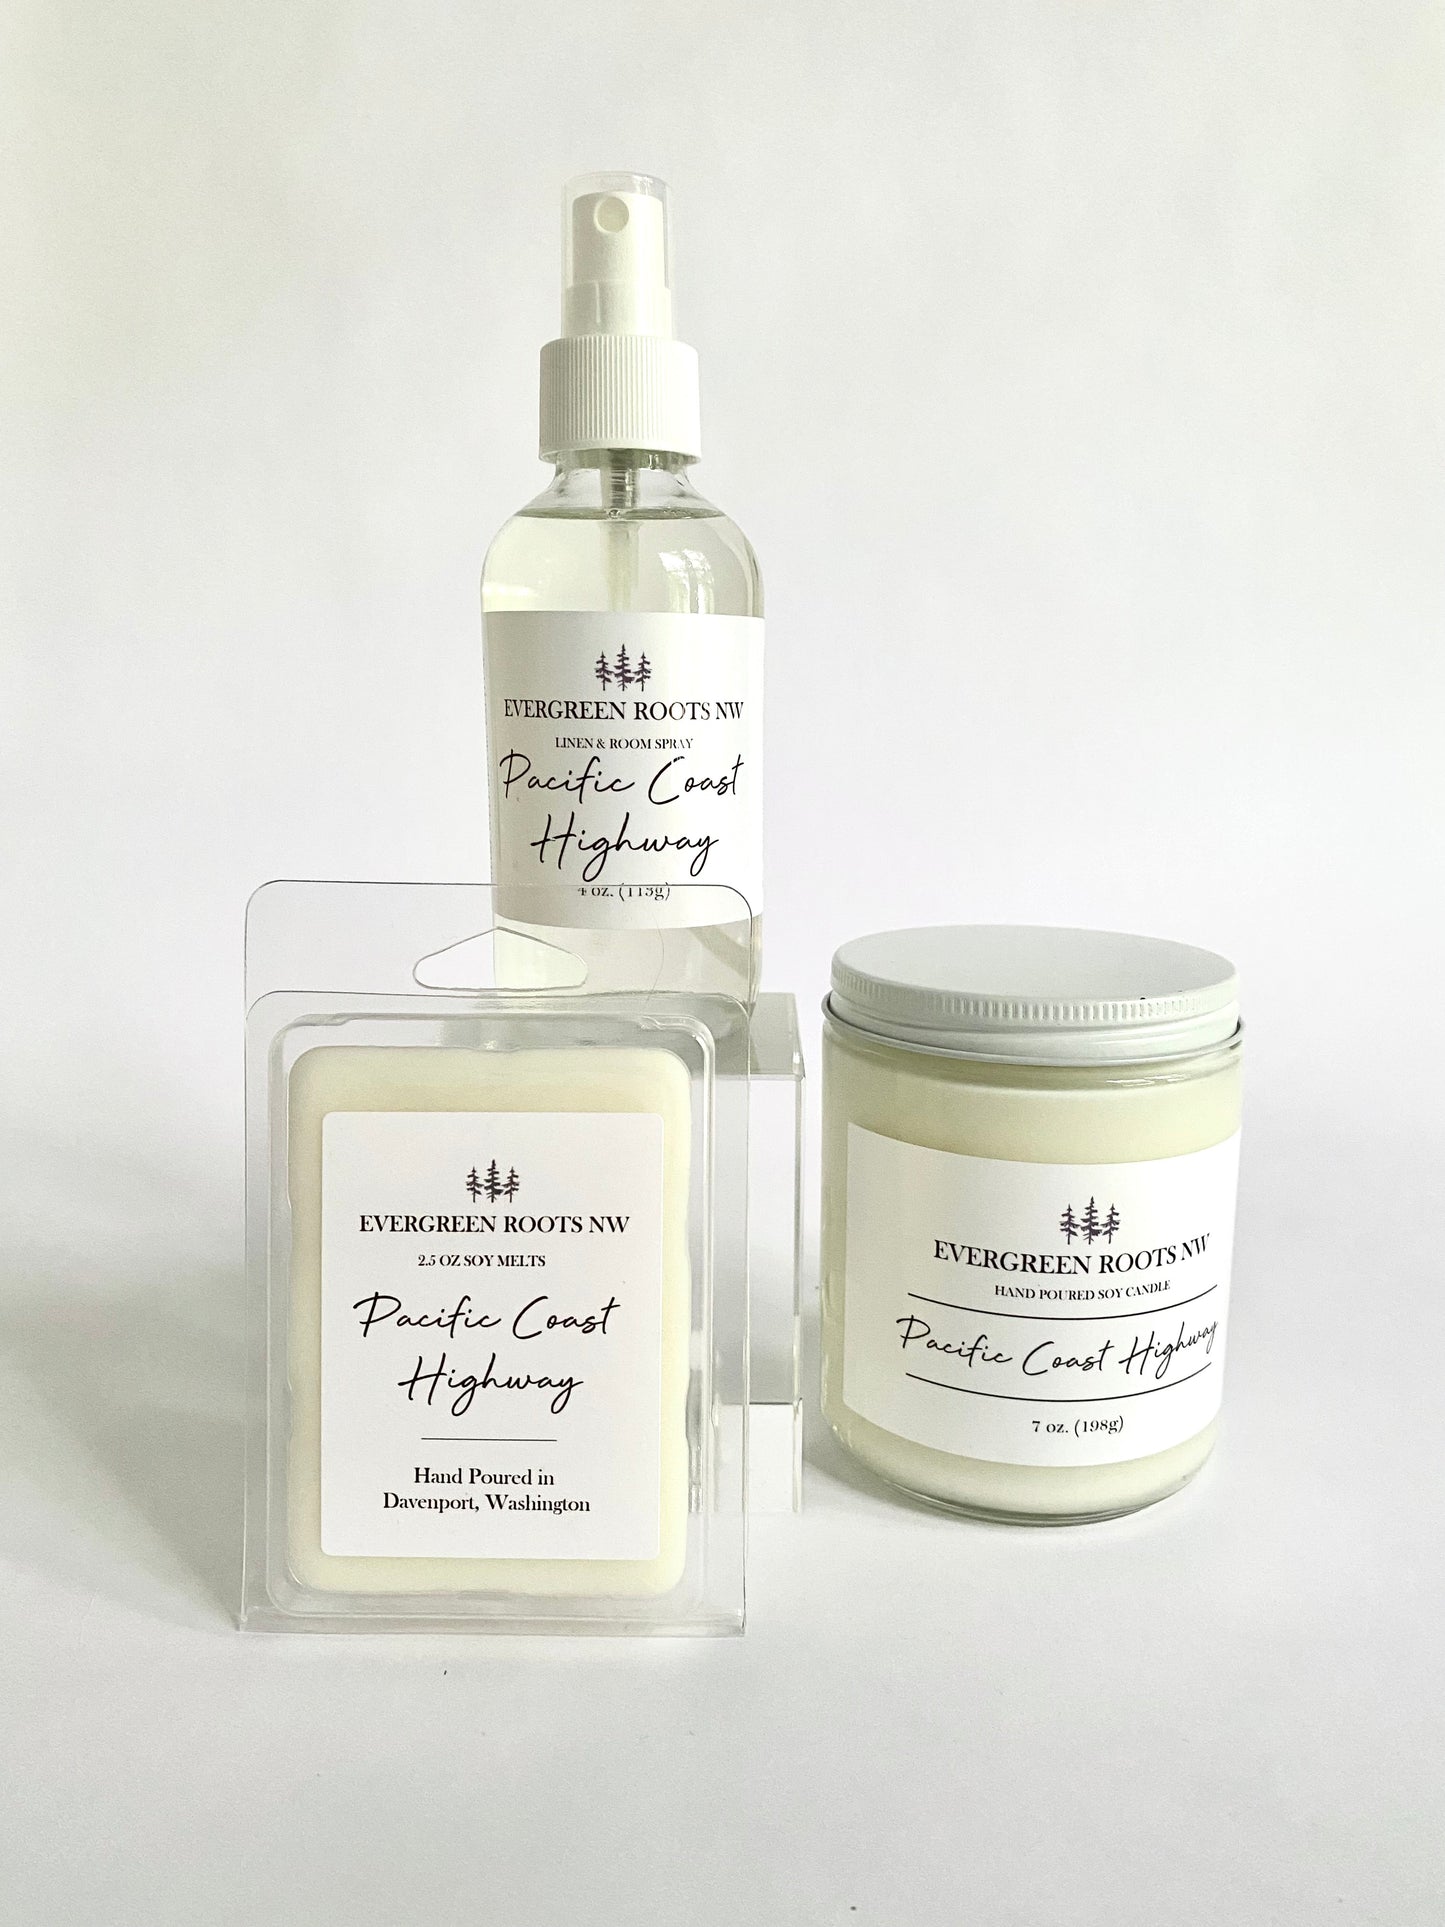 Pacific Coast Highway Soy Wax Candle, wax melts and room linen spray